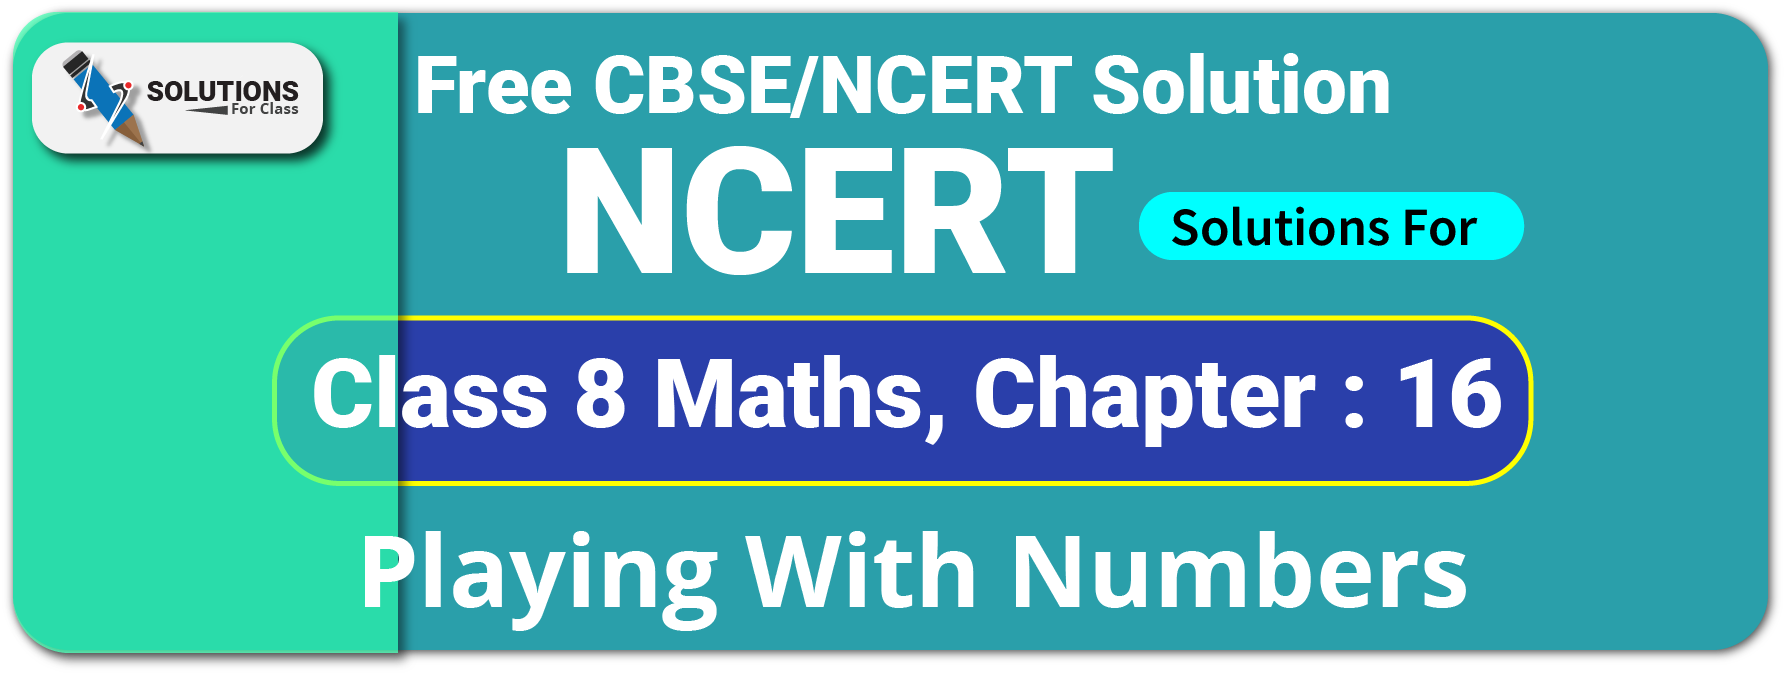 NCERT Solutions For Class 8 Chapter 16, Playing with Numbers